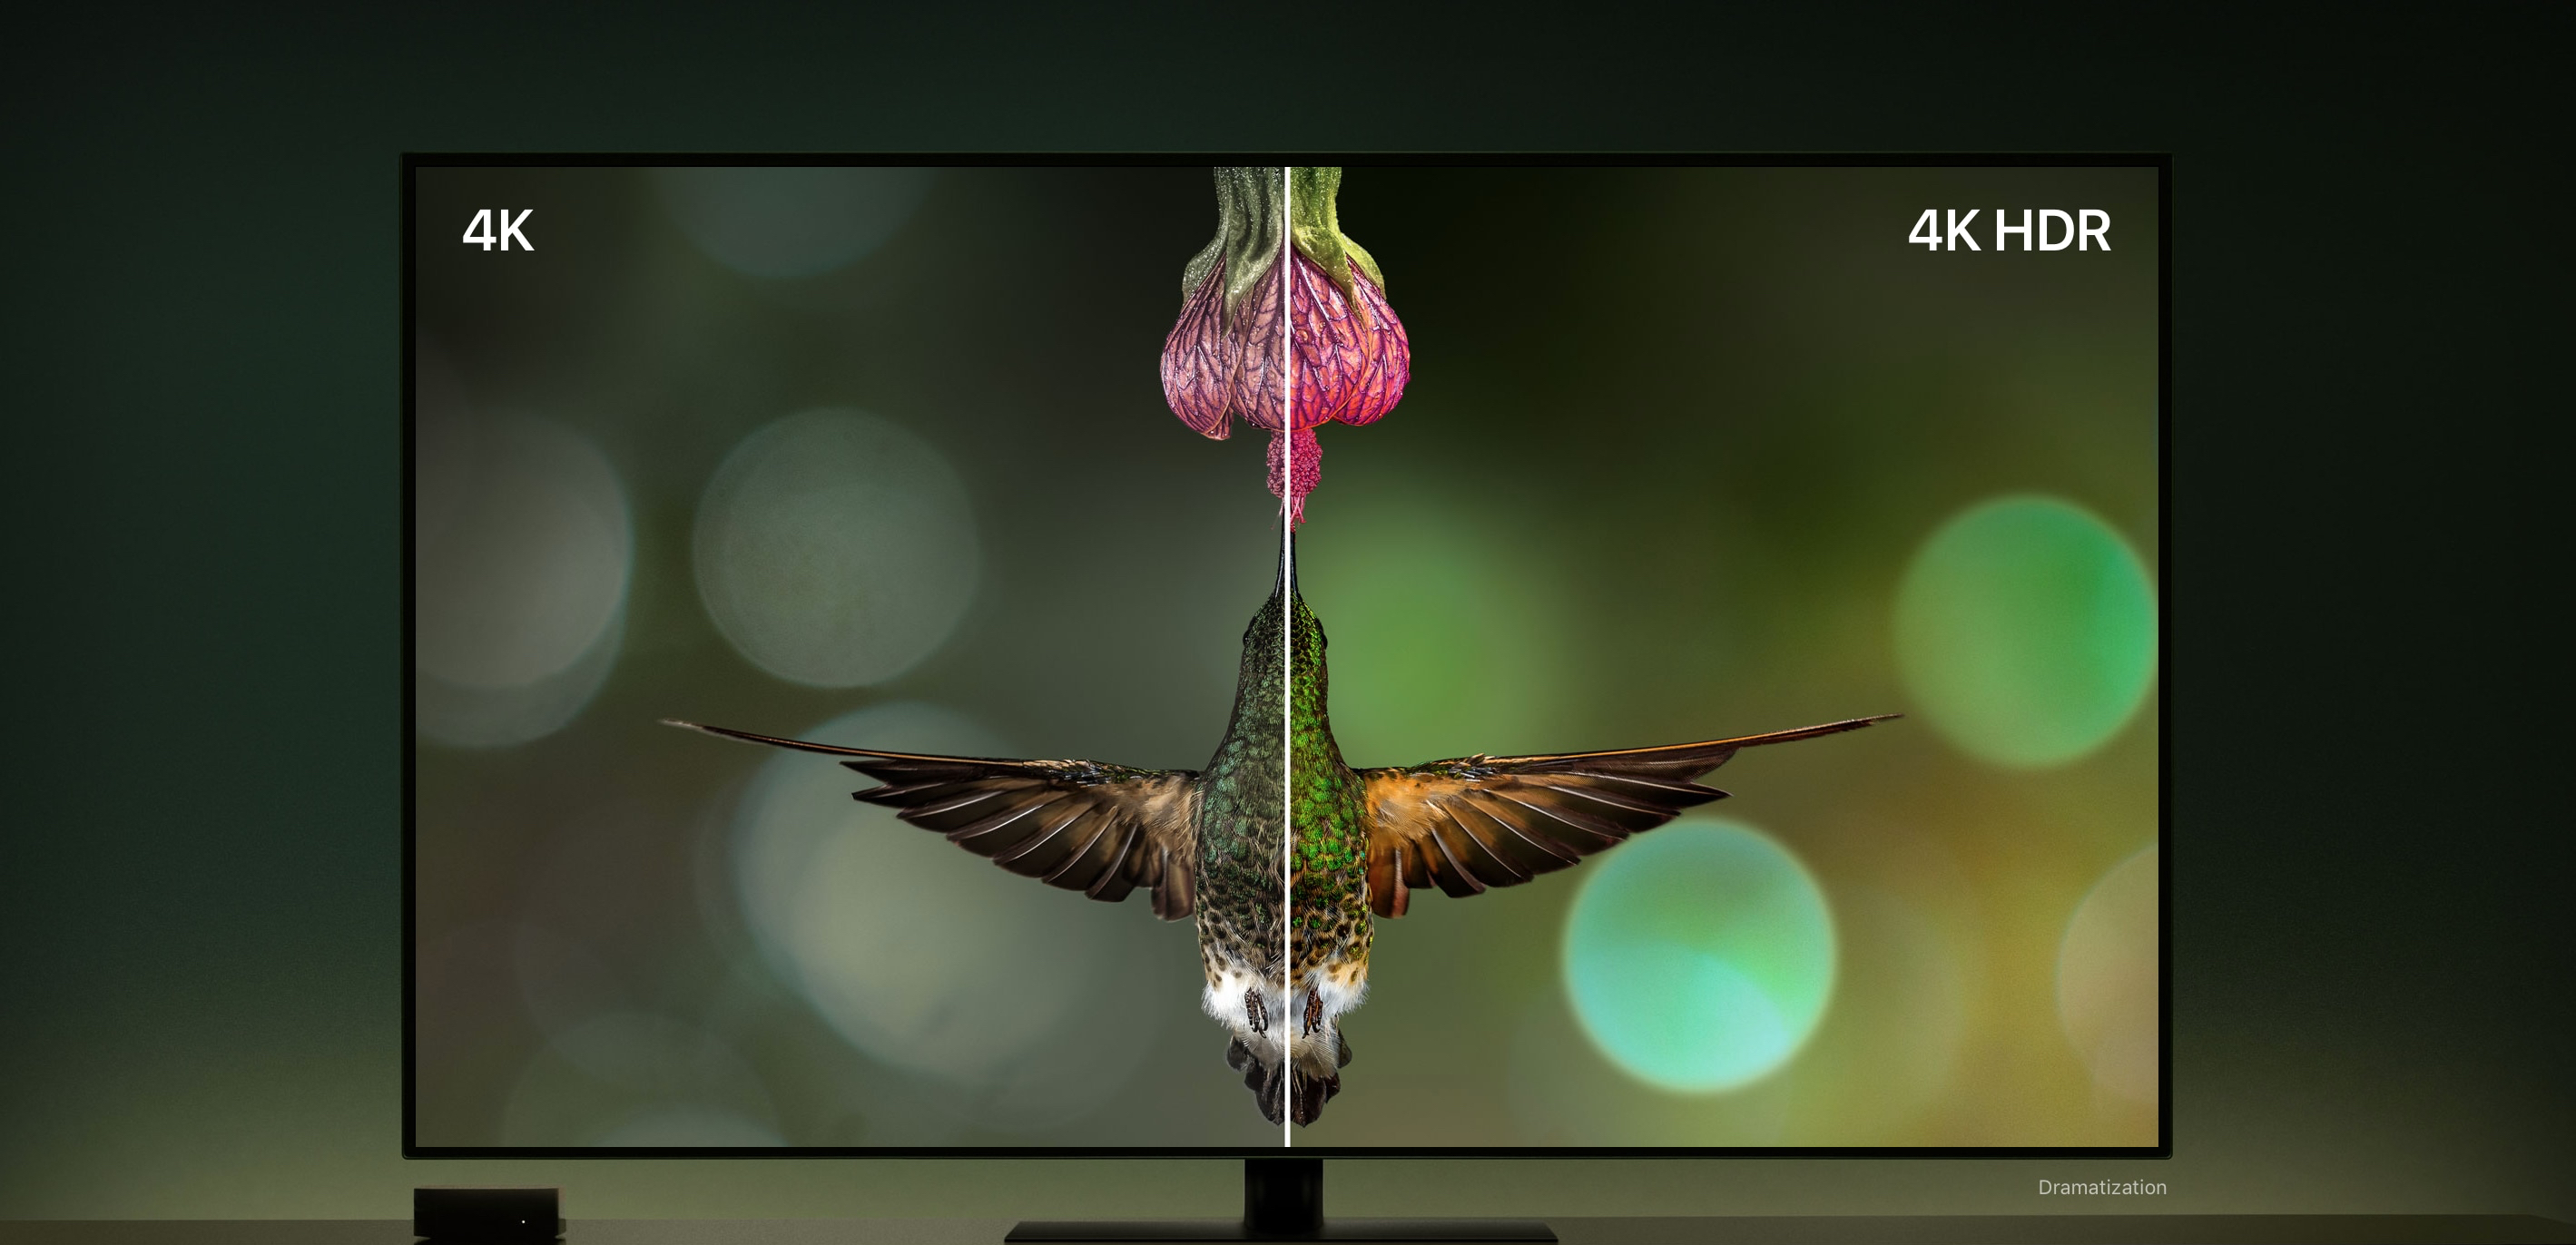 Difference between a 4K TV and a 4K / HDR